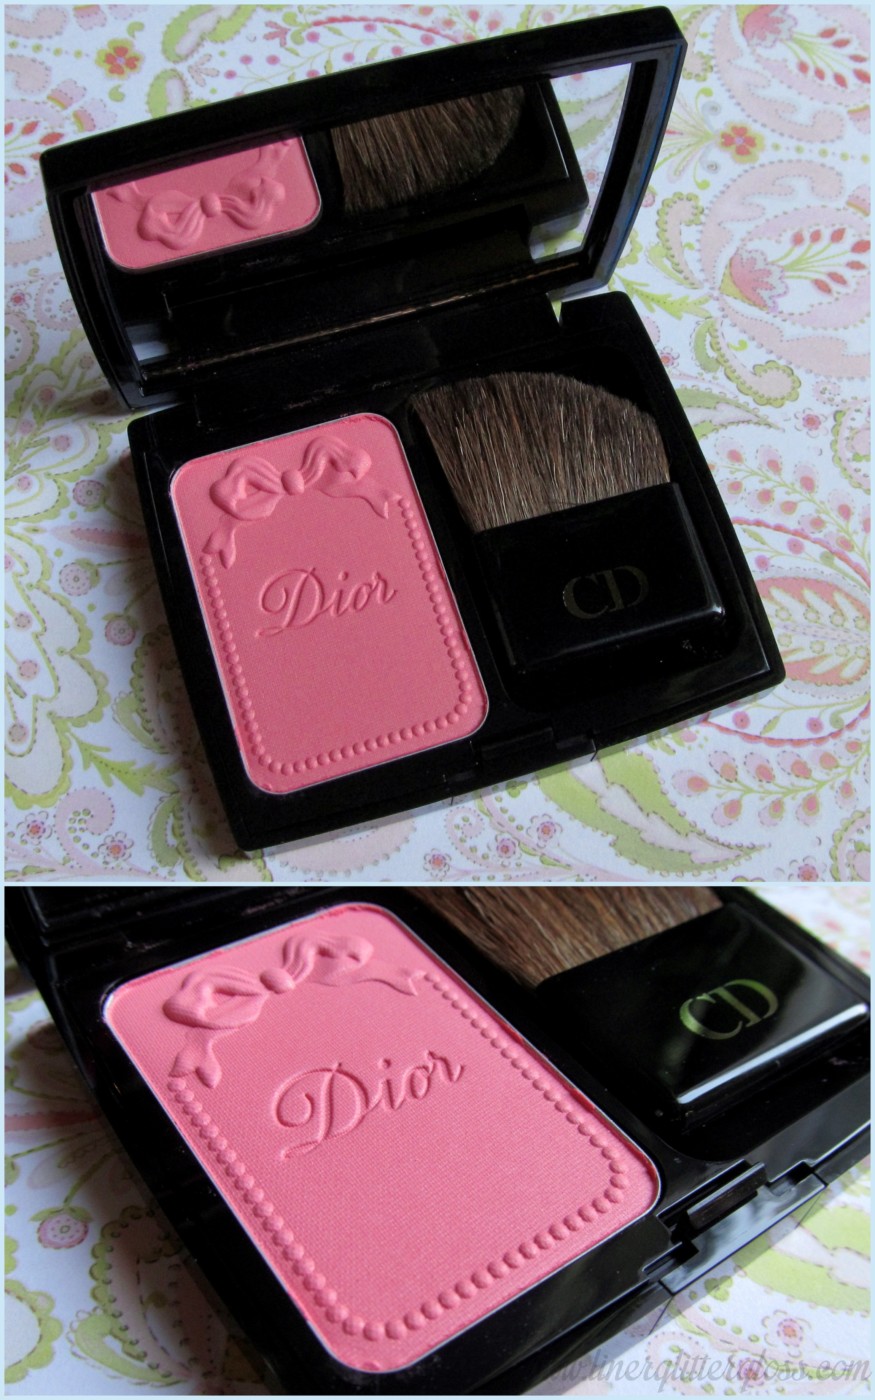 Dior Trianon Spring 2014 preview & swatches